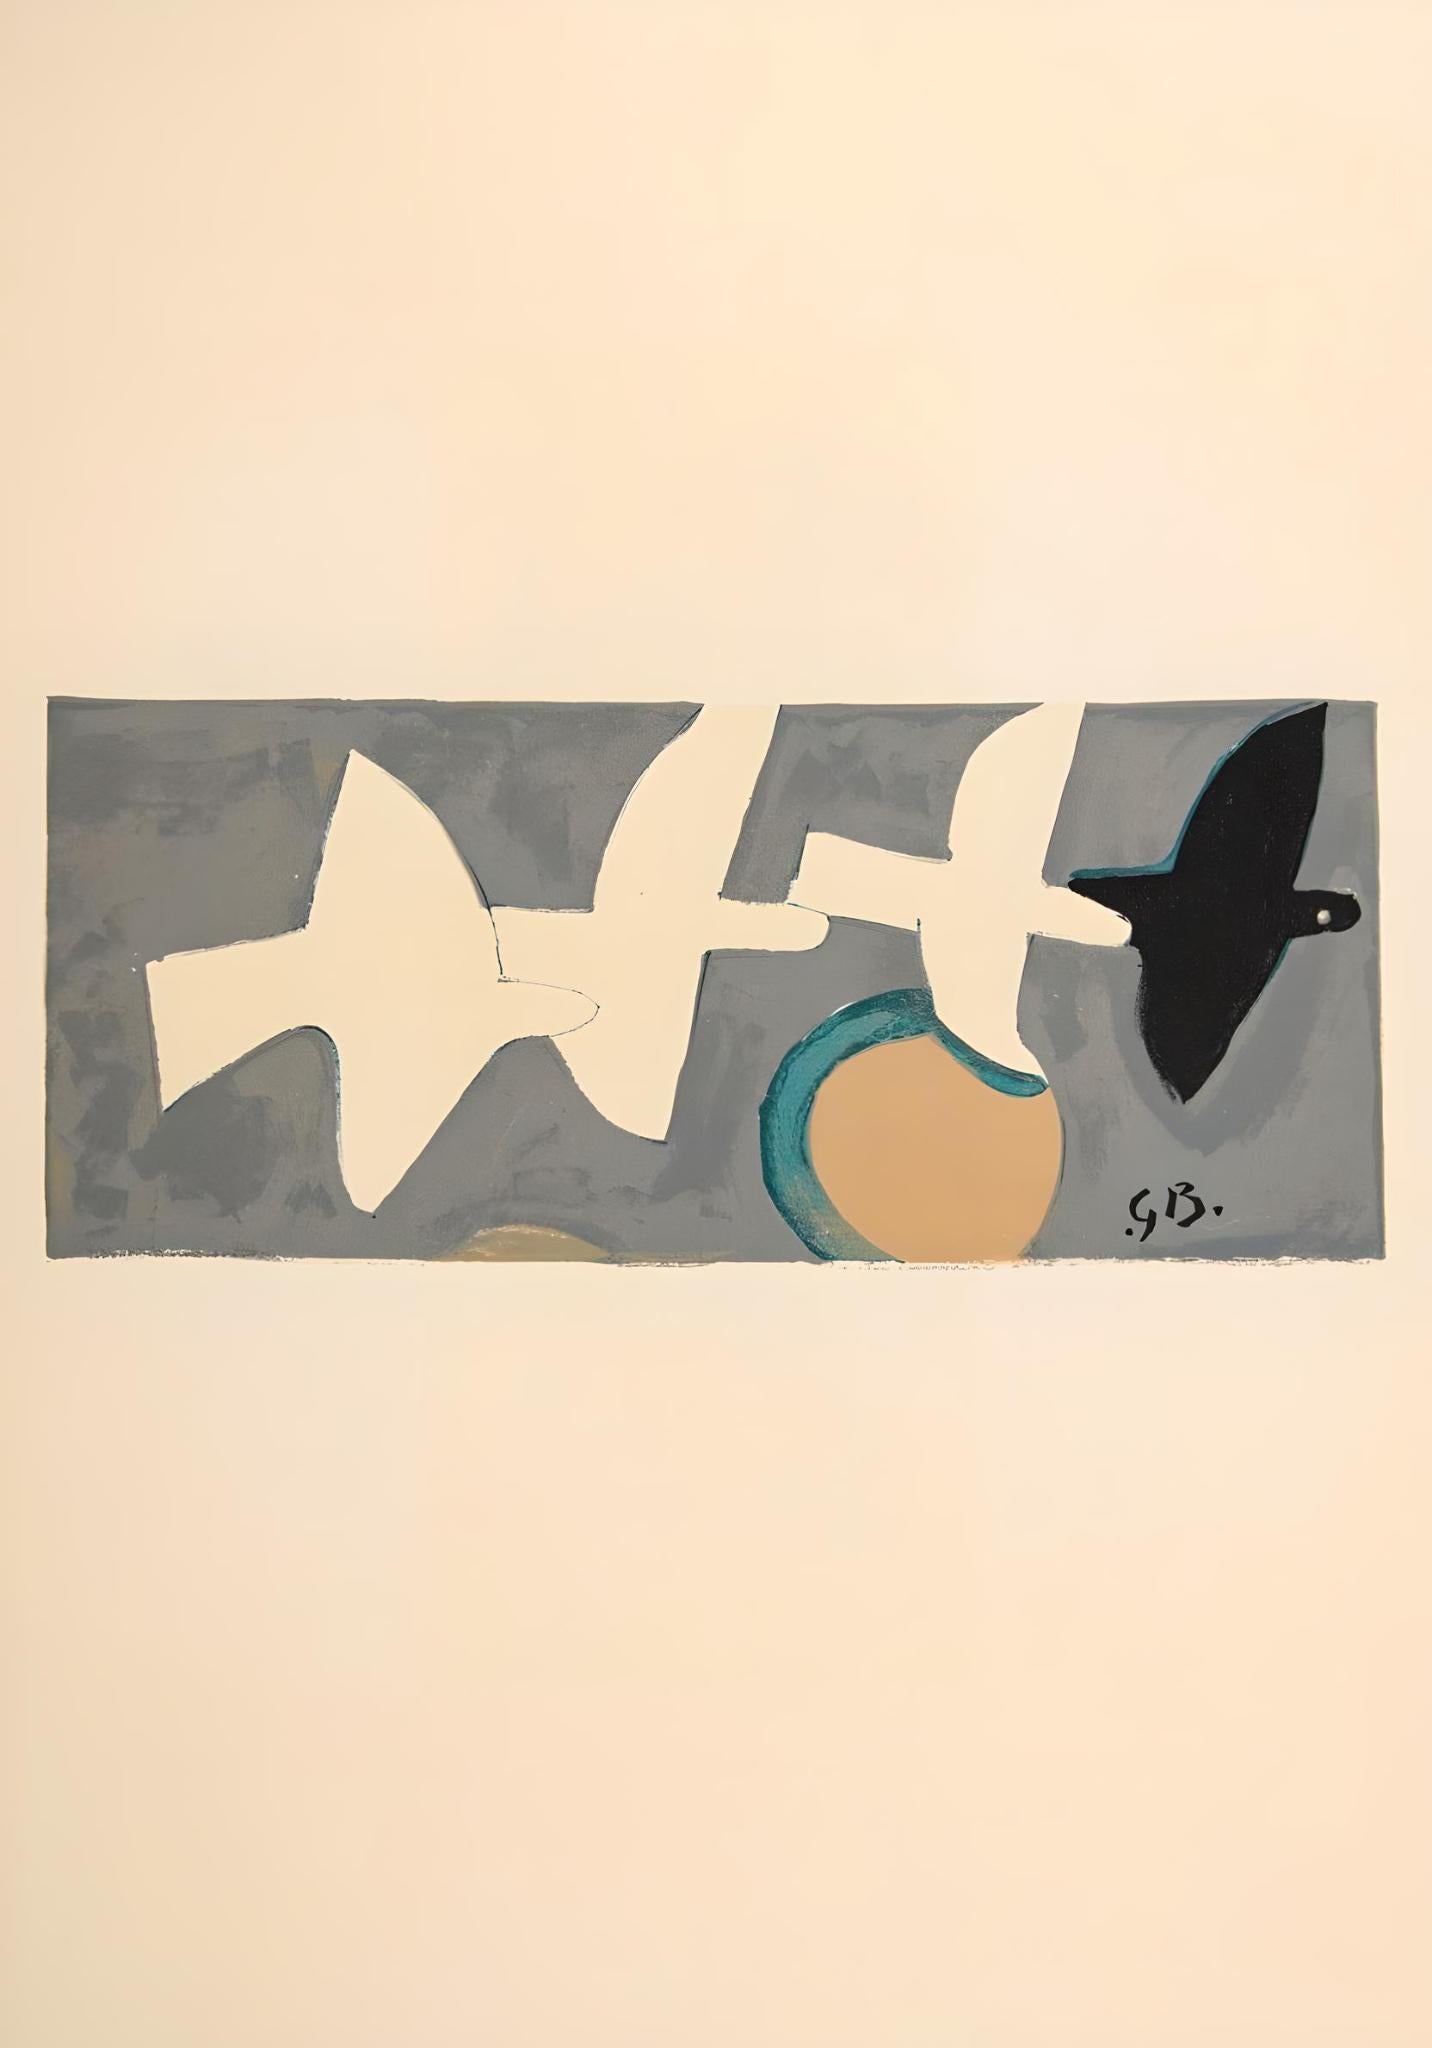 Lithograph on wove paper. Inscription: Signed in the plate and unnumbered; text on verso, as issued. Excellent Condition. Notes: From Derrière le miroir, N° 115, published by Derrière le miroir, Paris; printed by Galerie Maeght, Paris, 1959.